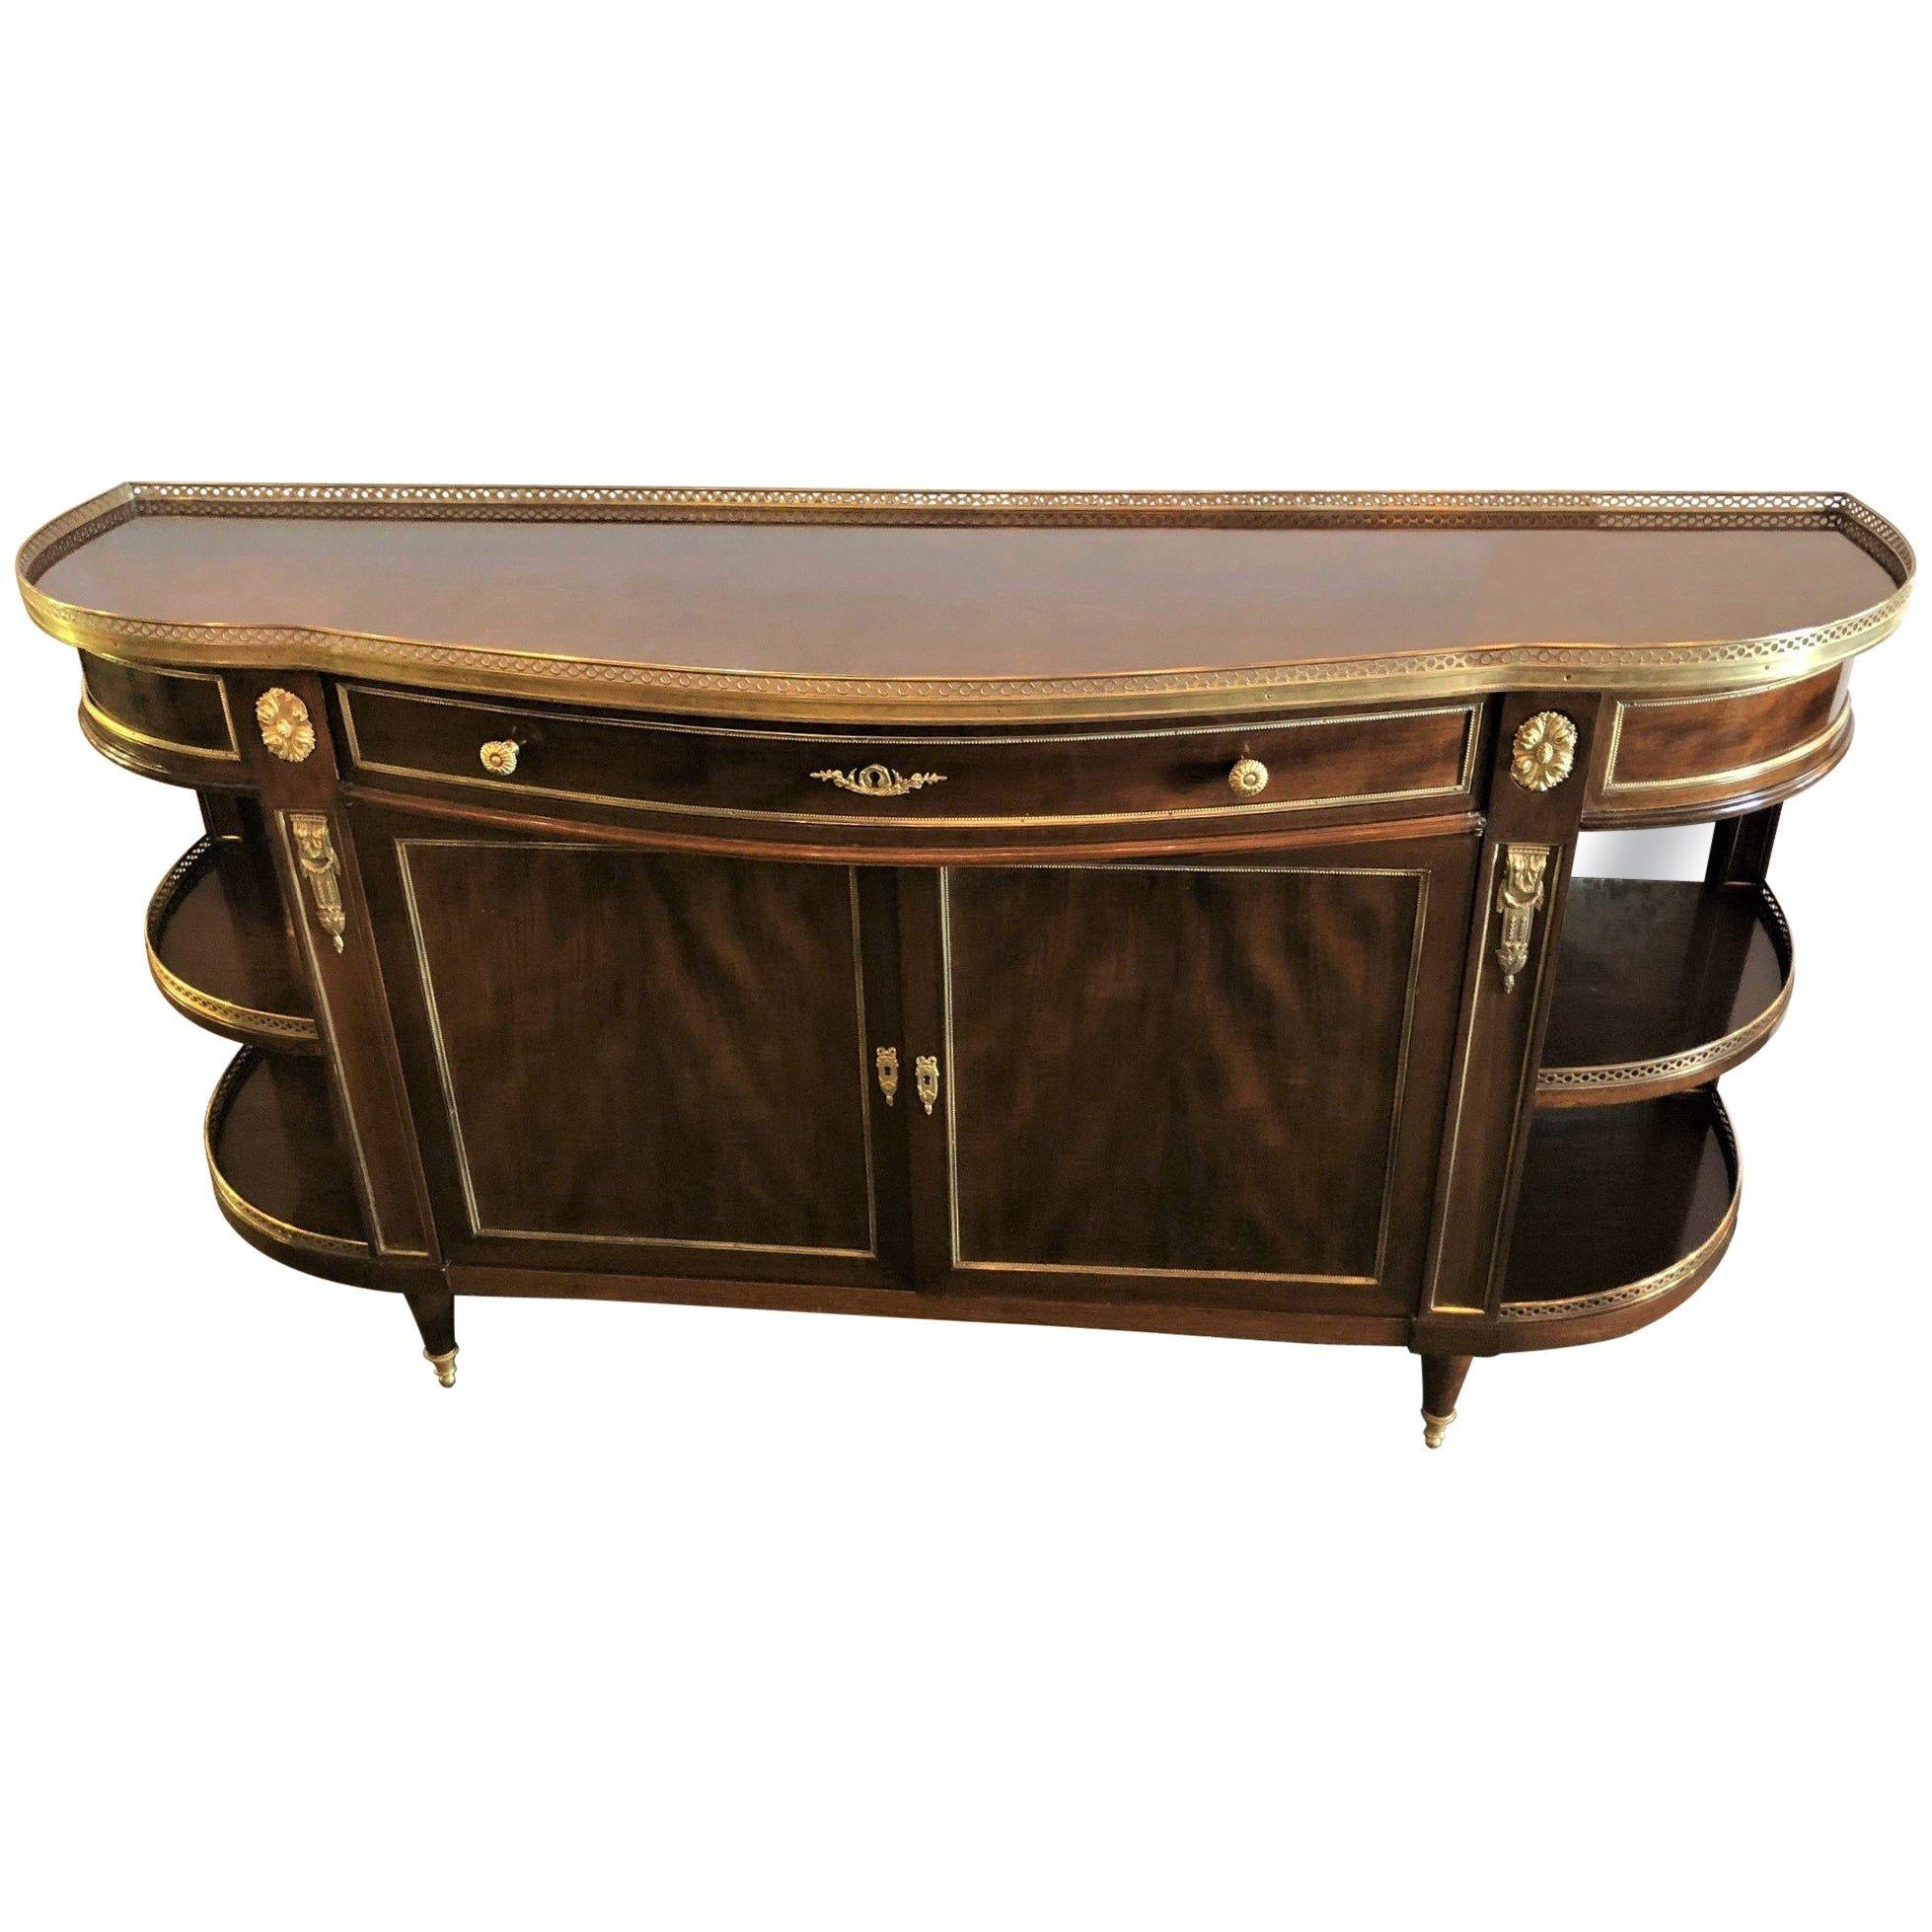 French Attributed to Maison Jansen Flame Mahogany Demilune Server Sideboard